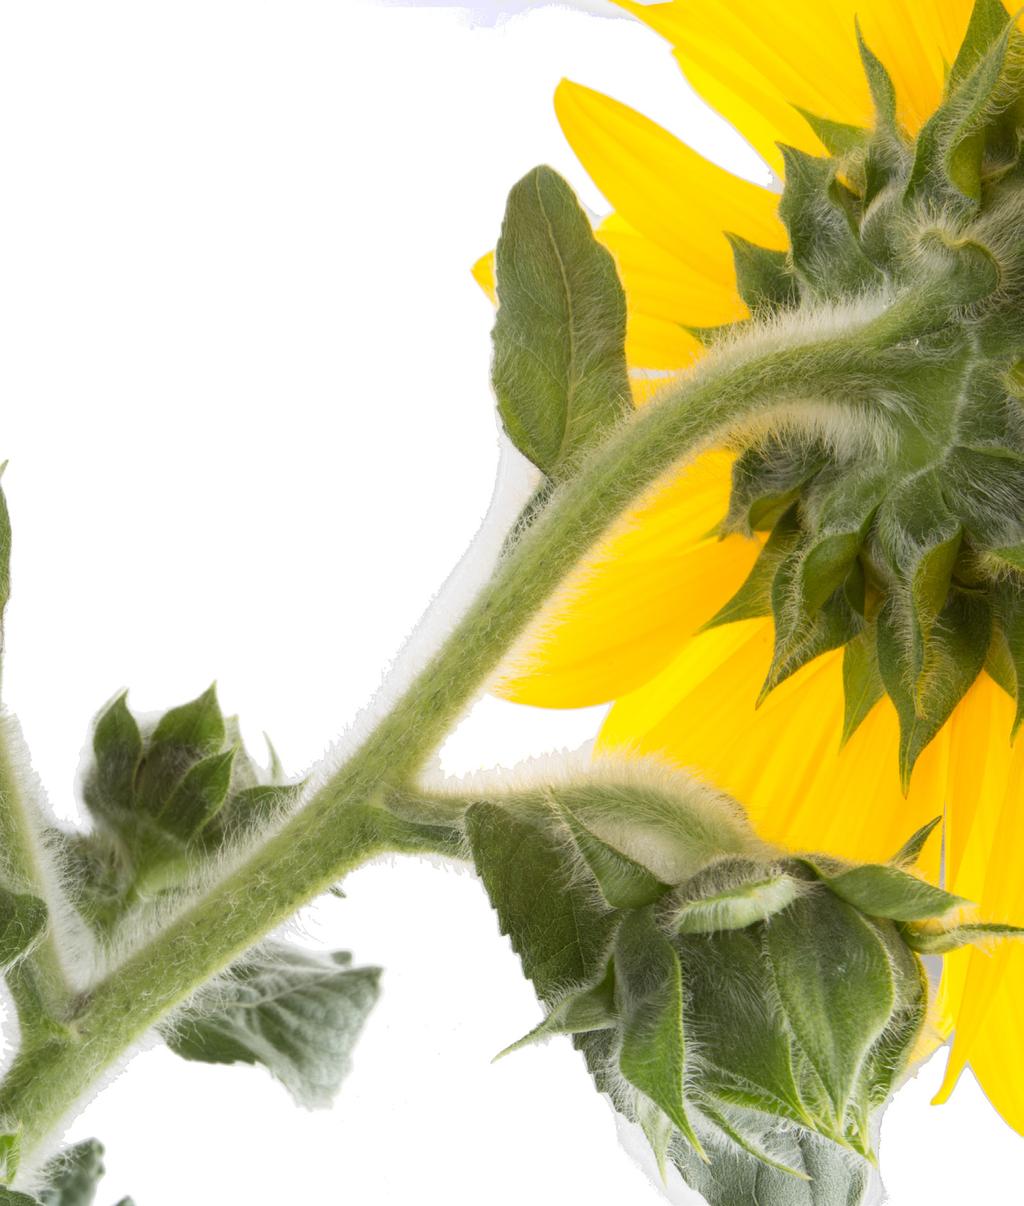 finish culture guide Tall indeterminate sunflower bred for branching, multiple flowers and large garden habit. Best grown in large premium containers and spaced during production. Container size: 2.